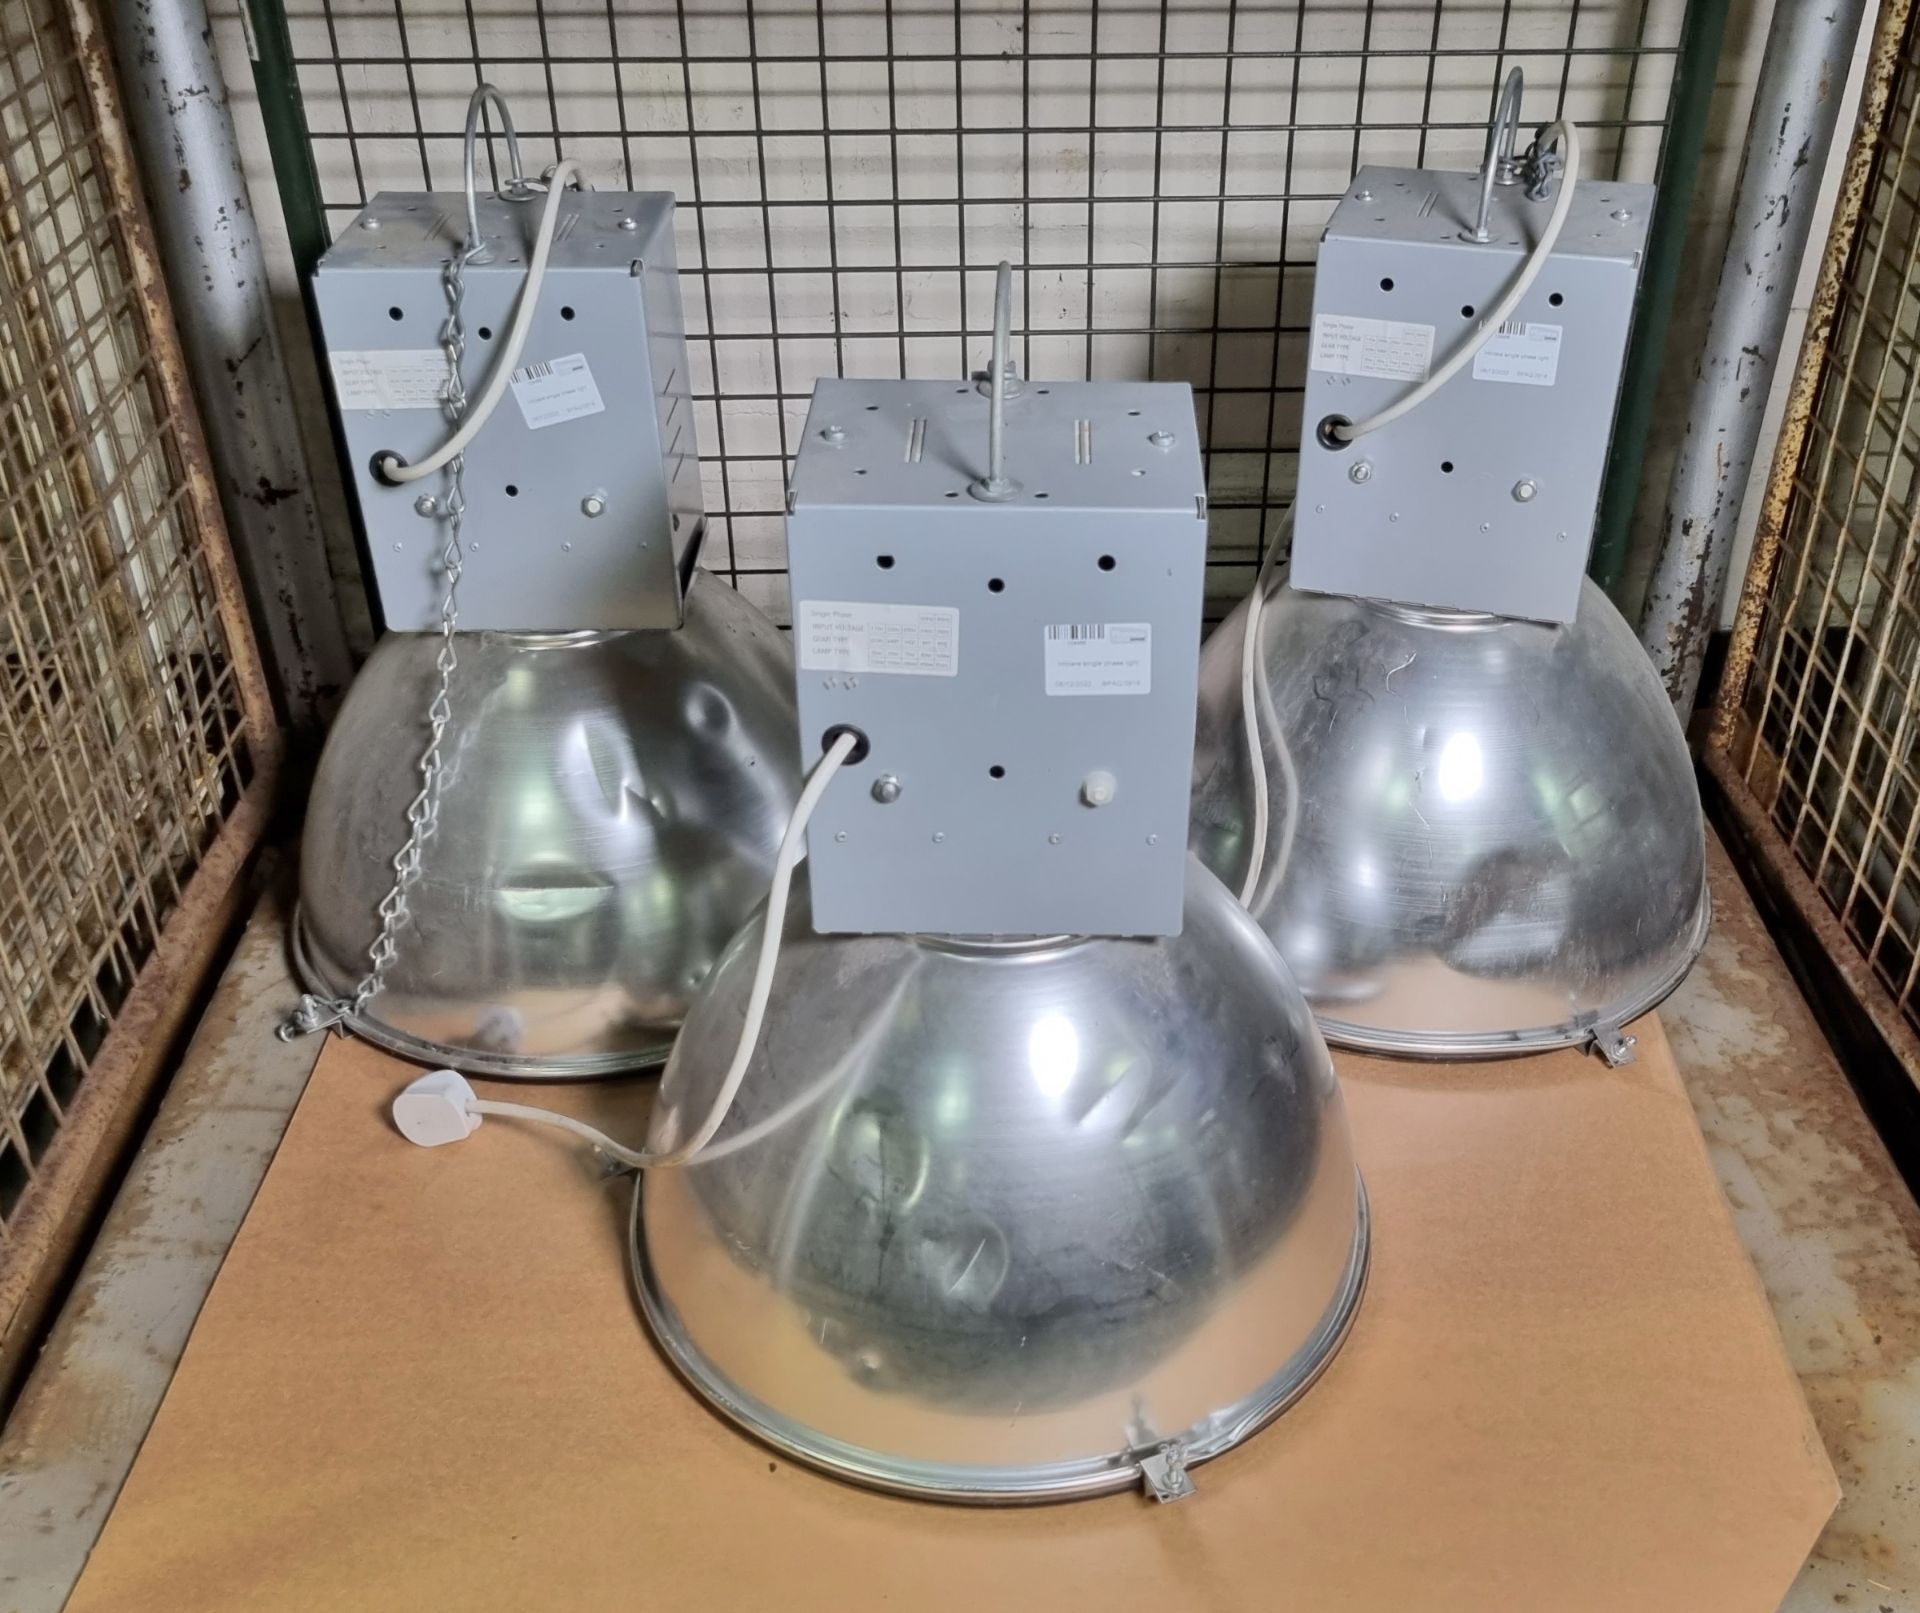 3x Hilclare single phase lights